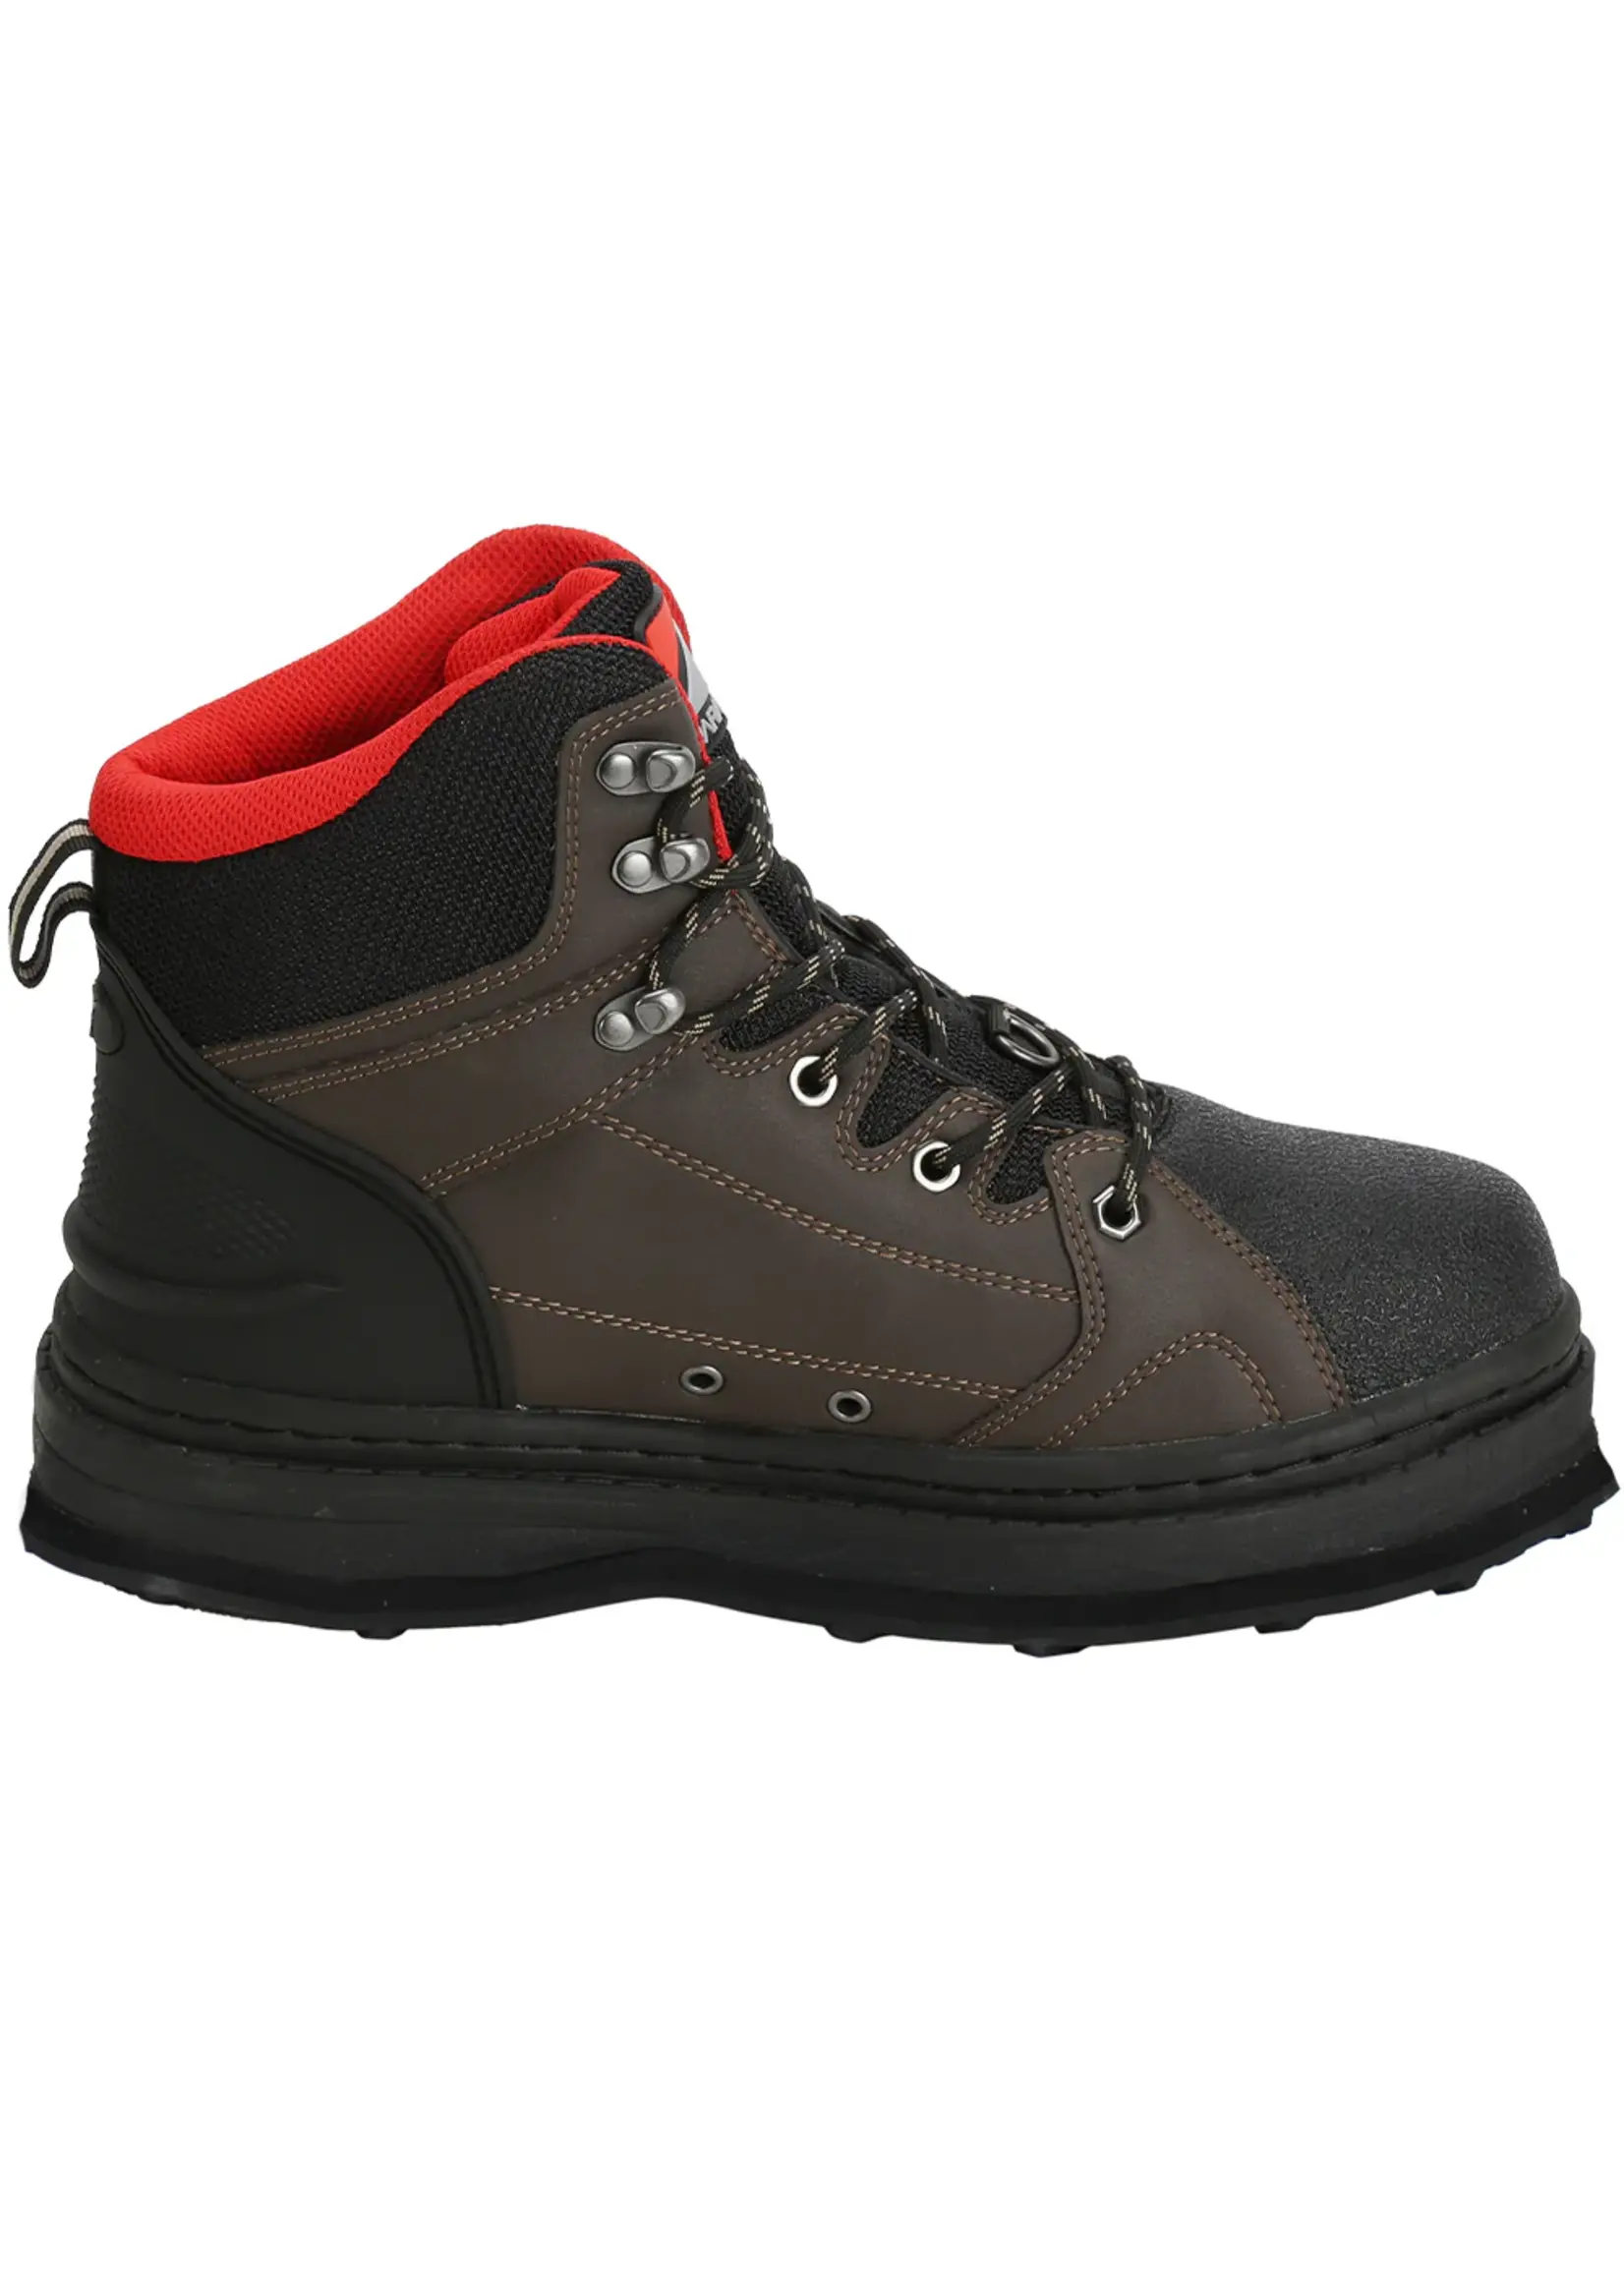 Paramount Paramount Deep Eddy Rock Jam Cleated Sole Wading Shoe